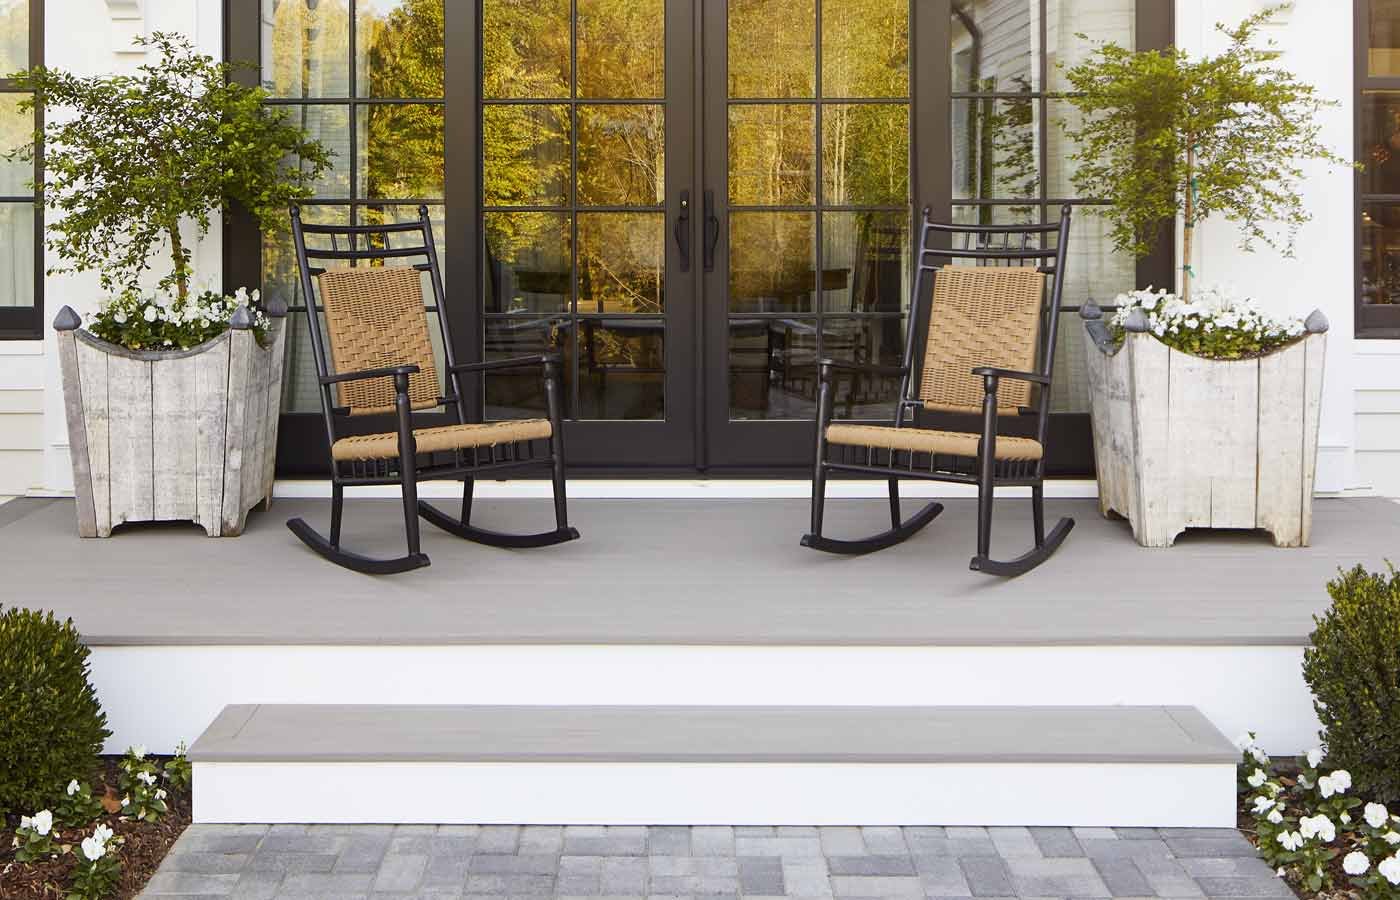 A patio with rocking chairs and potted plants